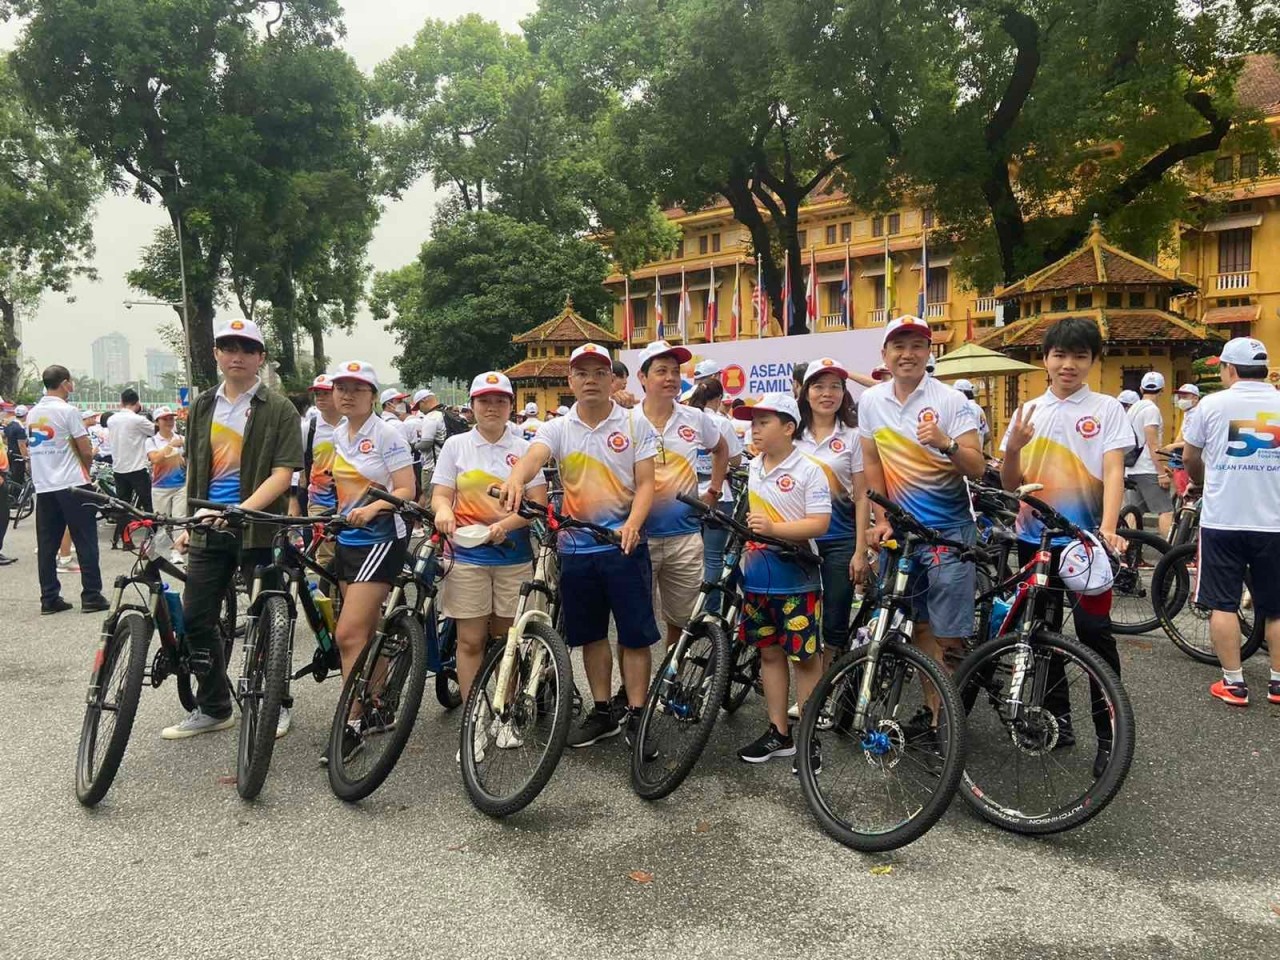 ASEAN Family Day 2022 Connect Ties in the Community and Partners in Hanoi